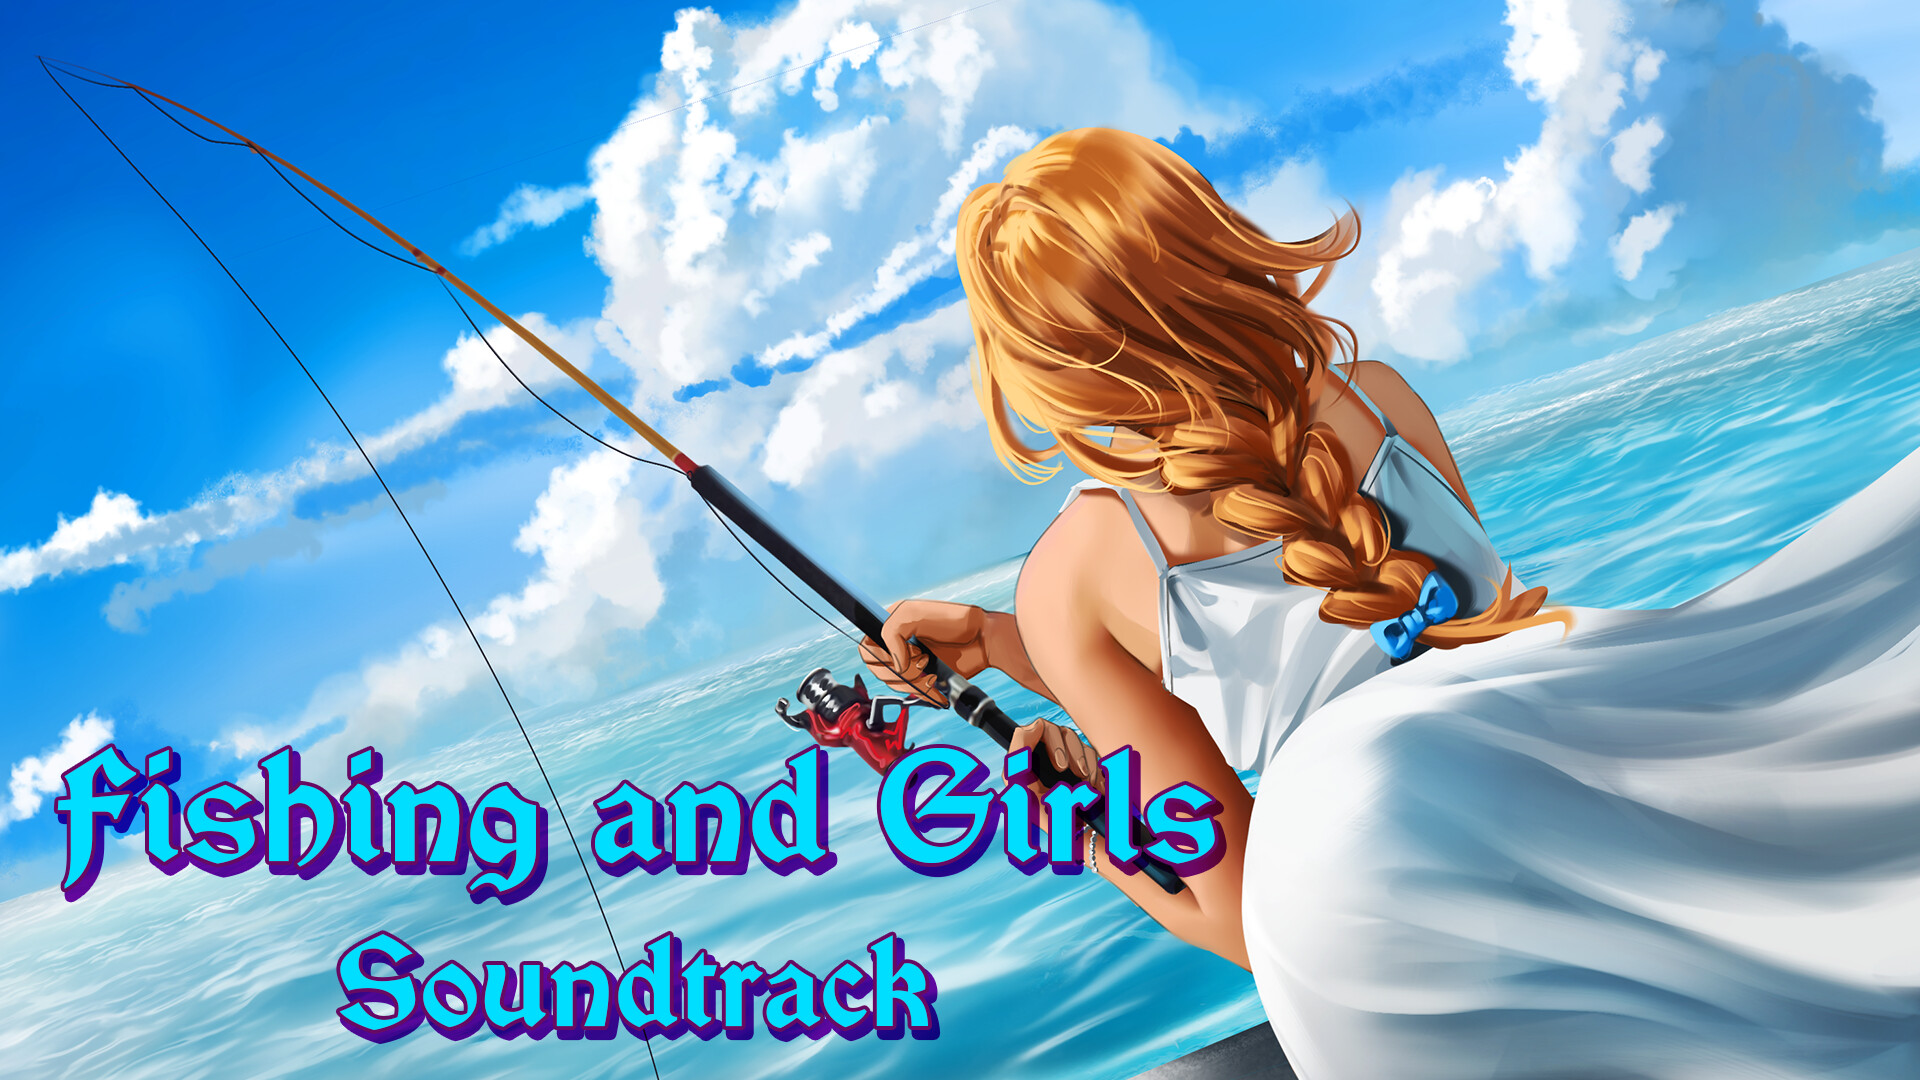 Fishing and Girls Soundtrack Featured Screenshot #1